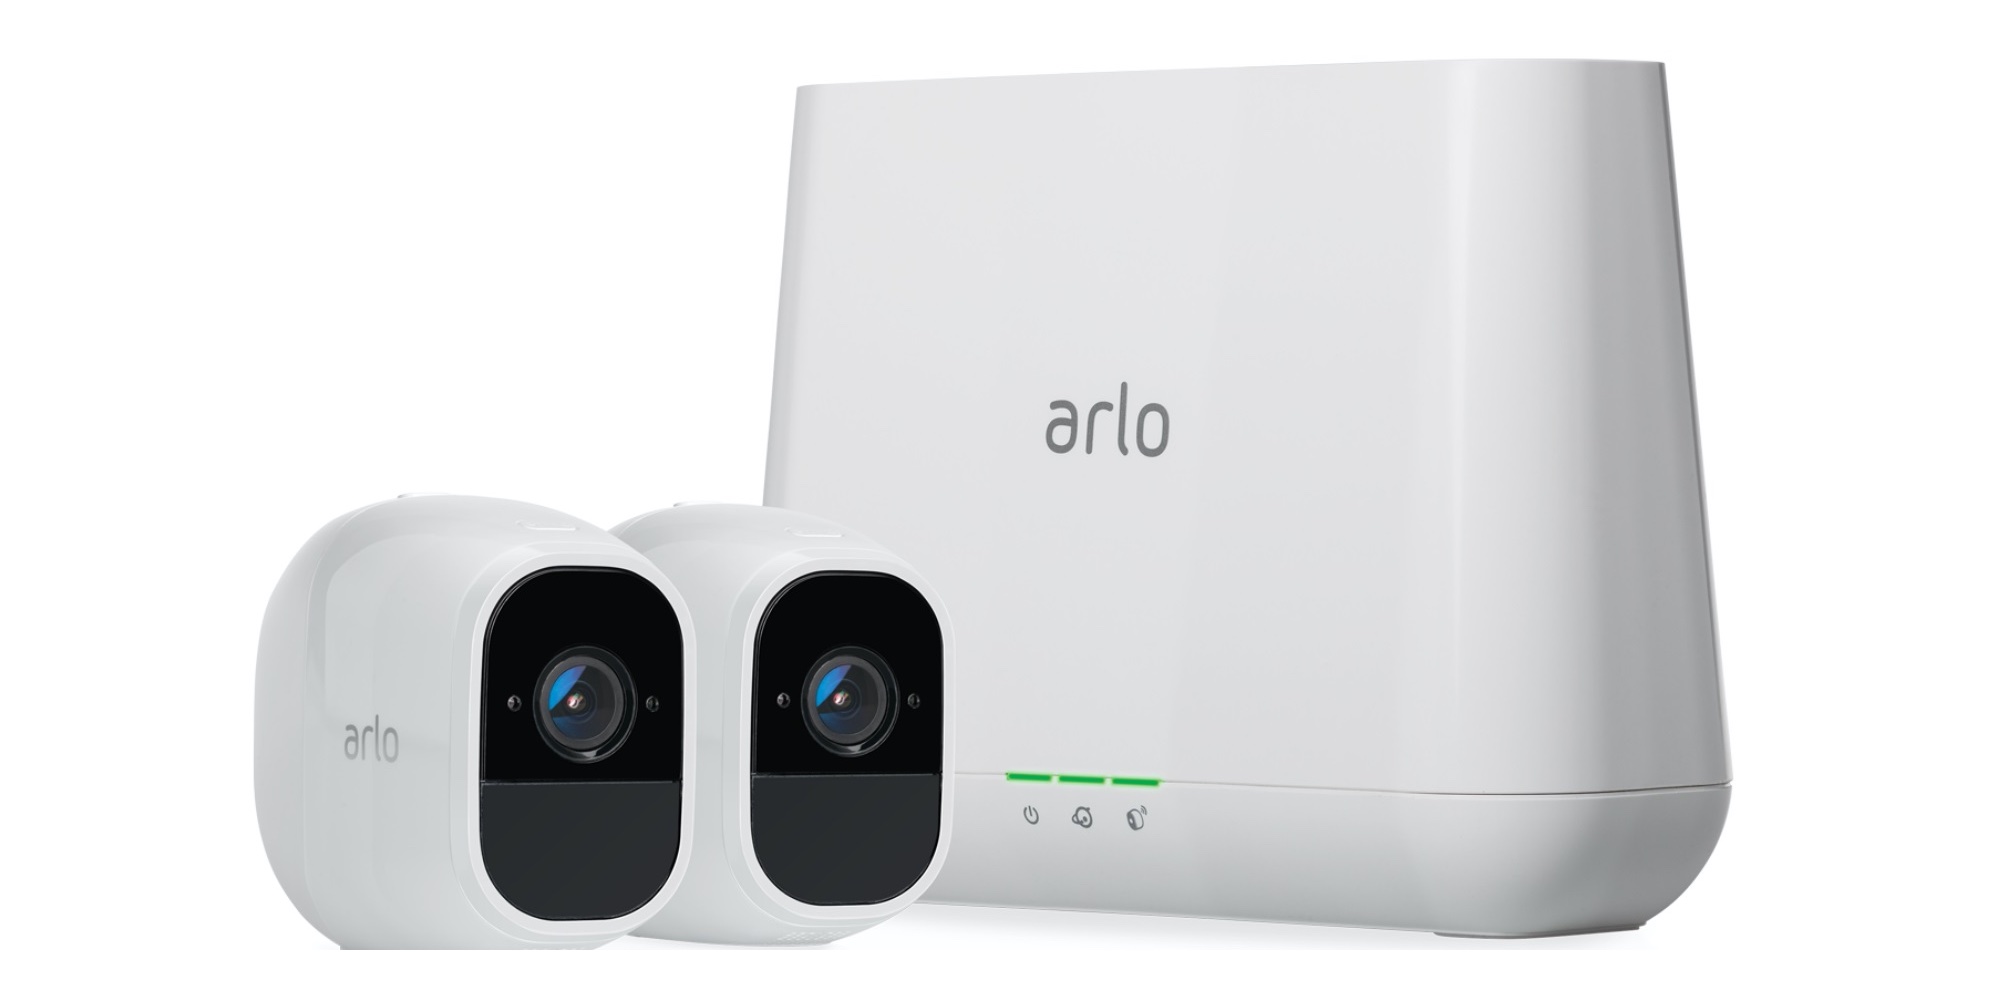 Arlo HomeKit cameras and light bundles are priced from 100 9to5Toys